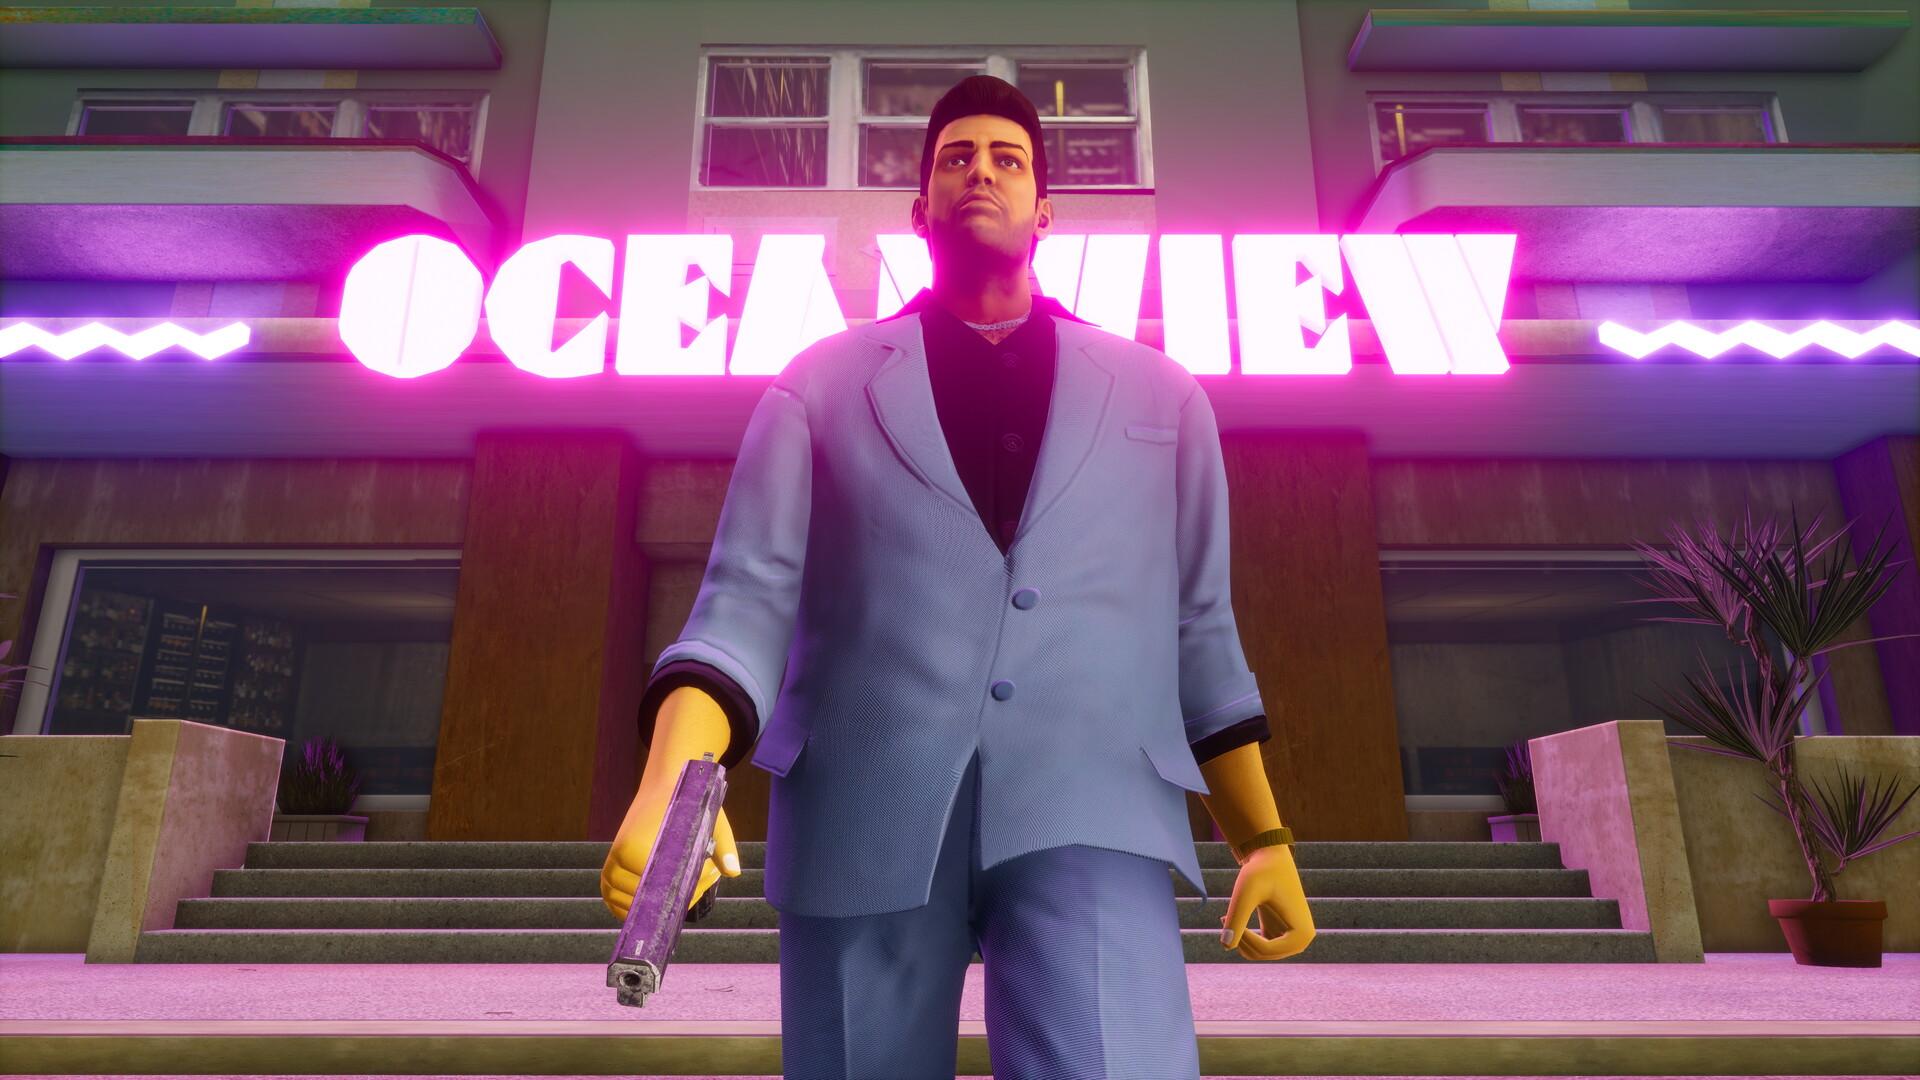 Screenshot №2 from game Grand Theft Auto: Vice City – The Definitive Edition